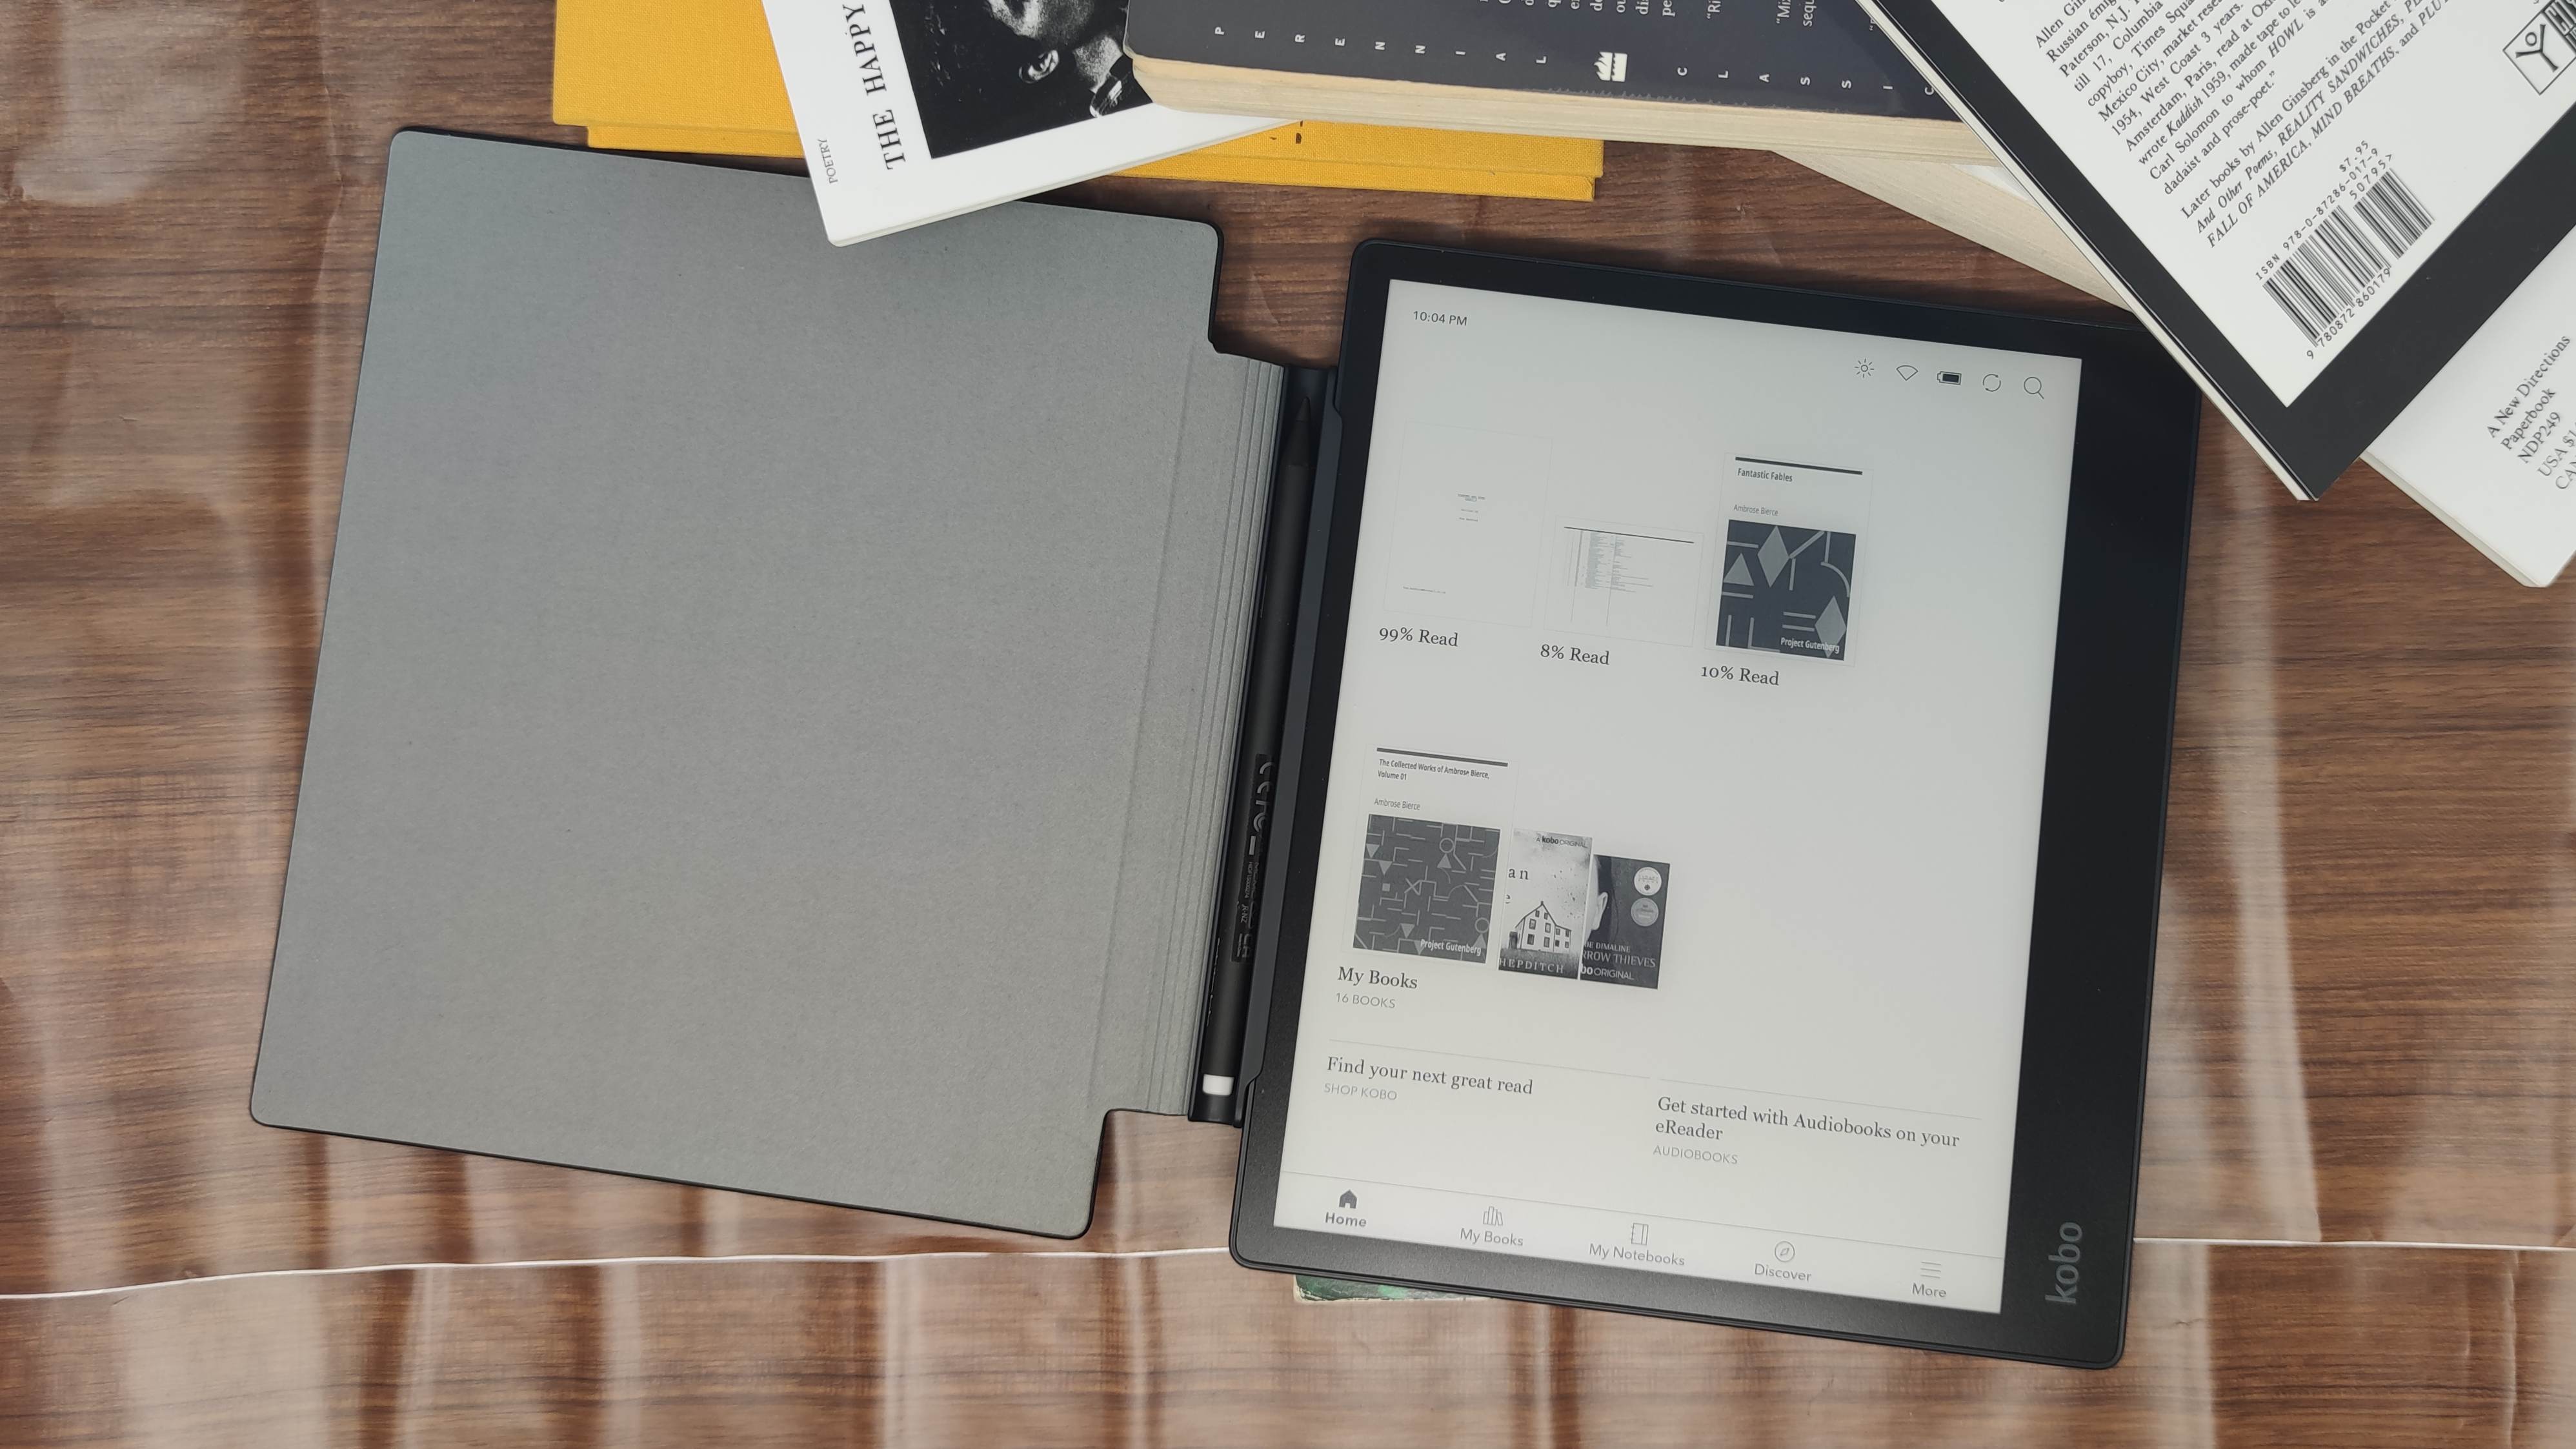 Introducing Kobo Elipsa: A bookstore, book and notebook combined in one